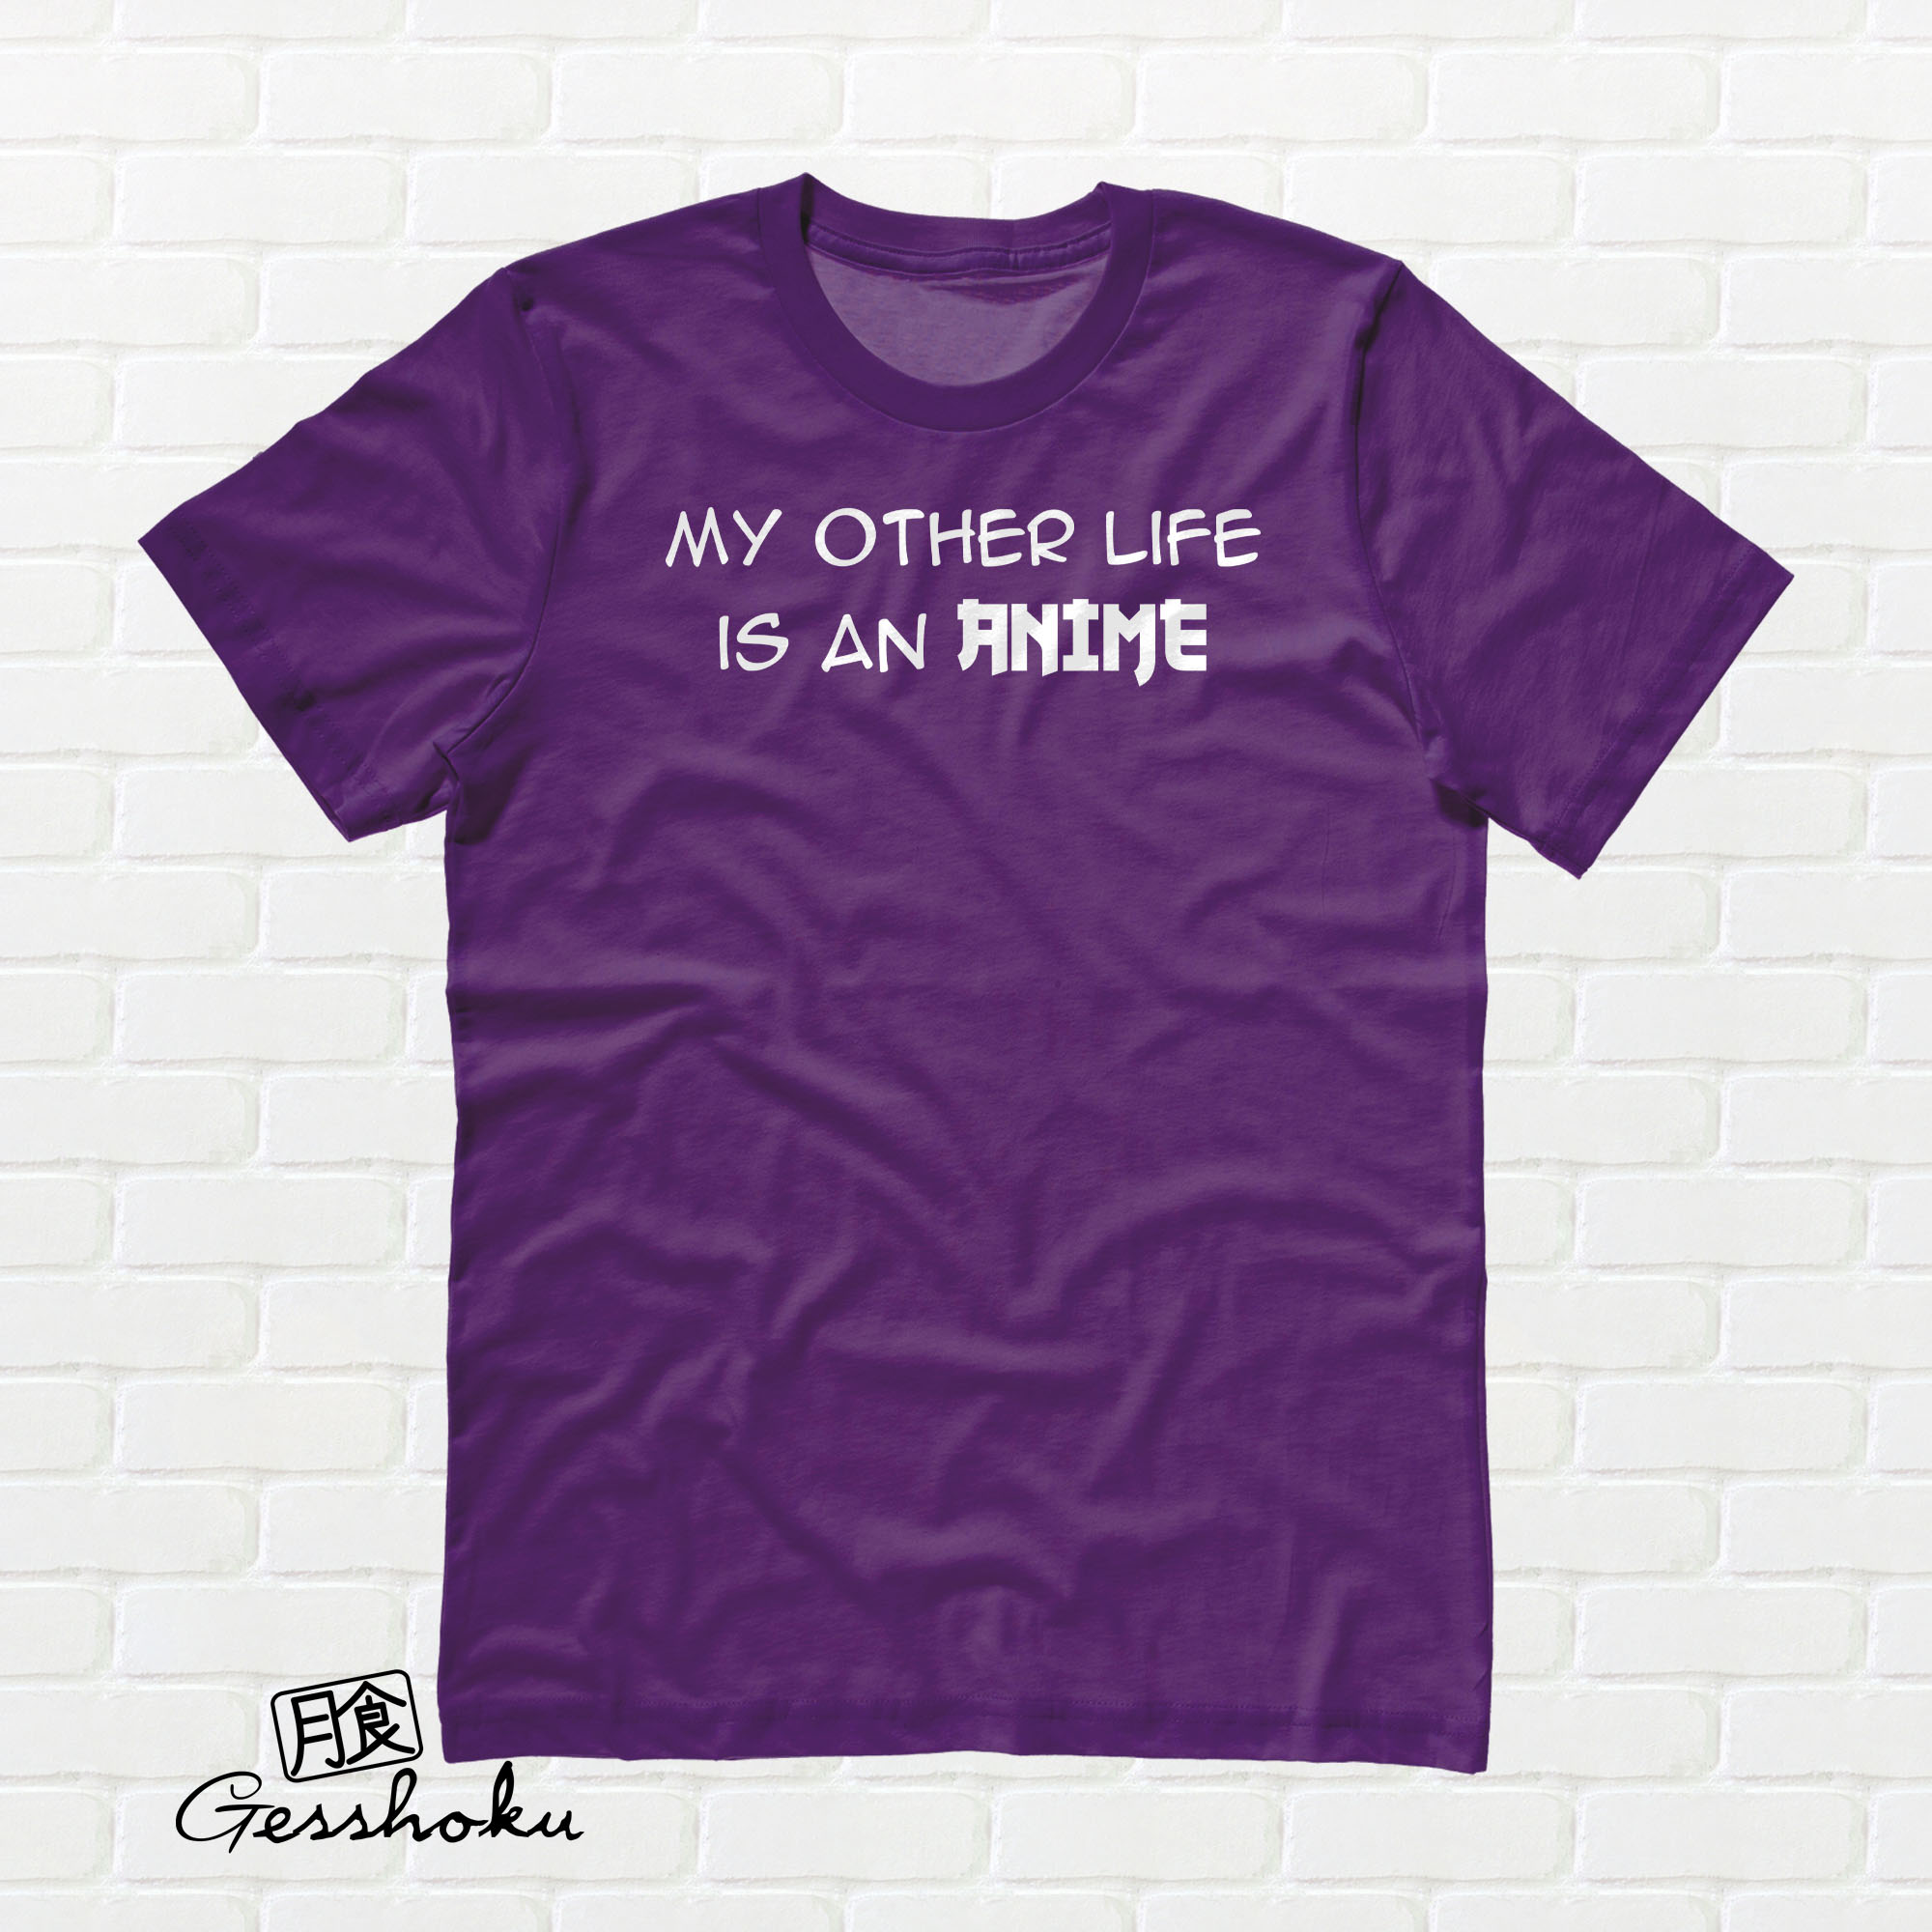 My Other Life is an Anime T-shirt - Purple